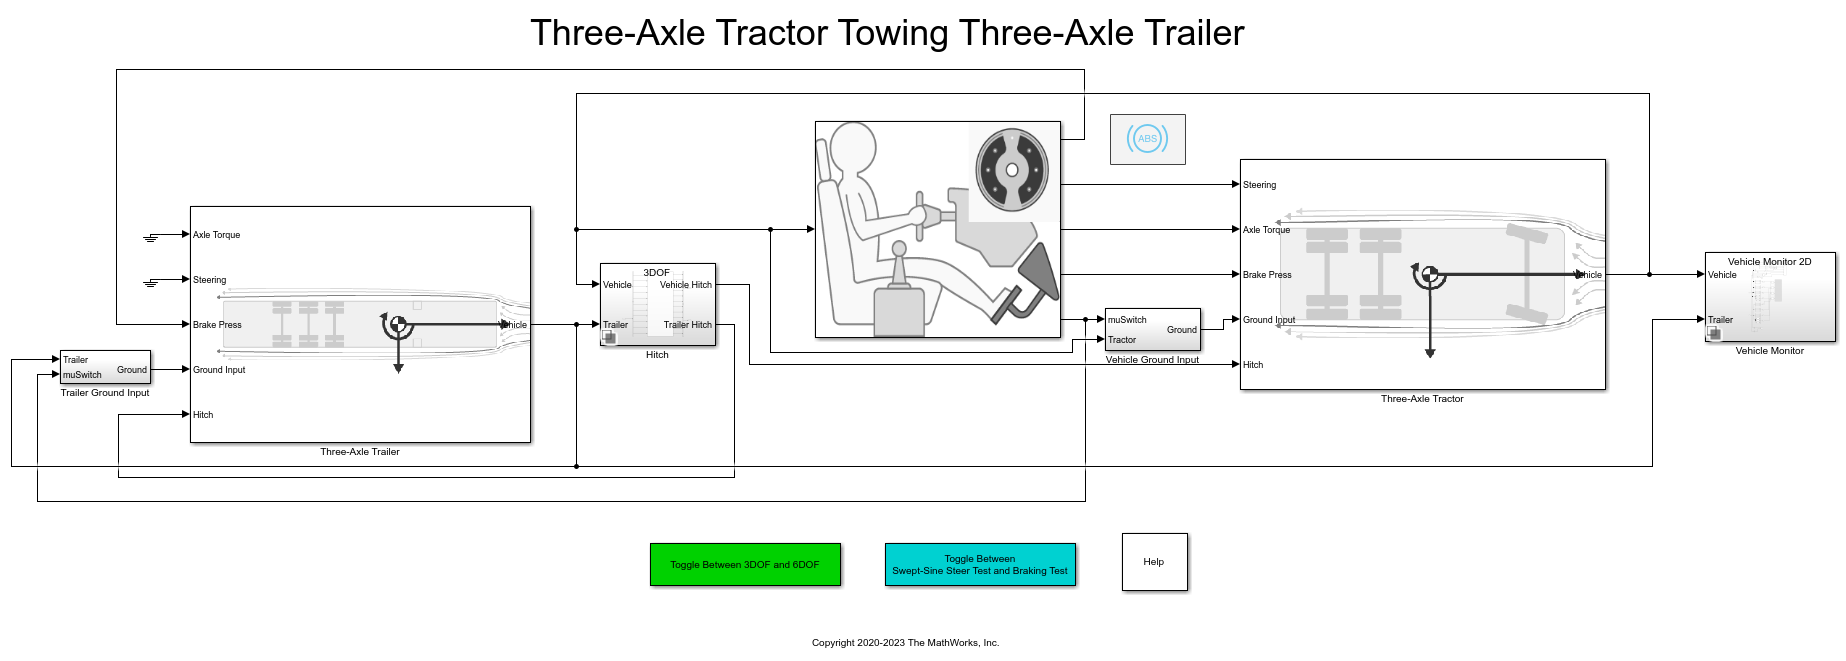 Three-Axle Tractor Towing a Three-Axle Trailer